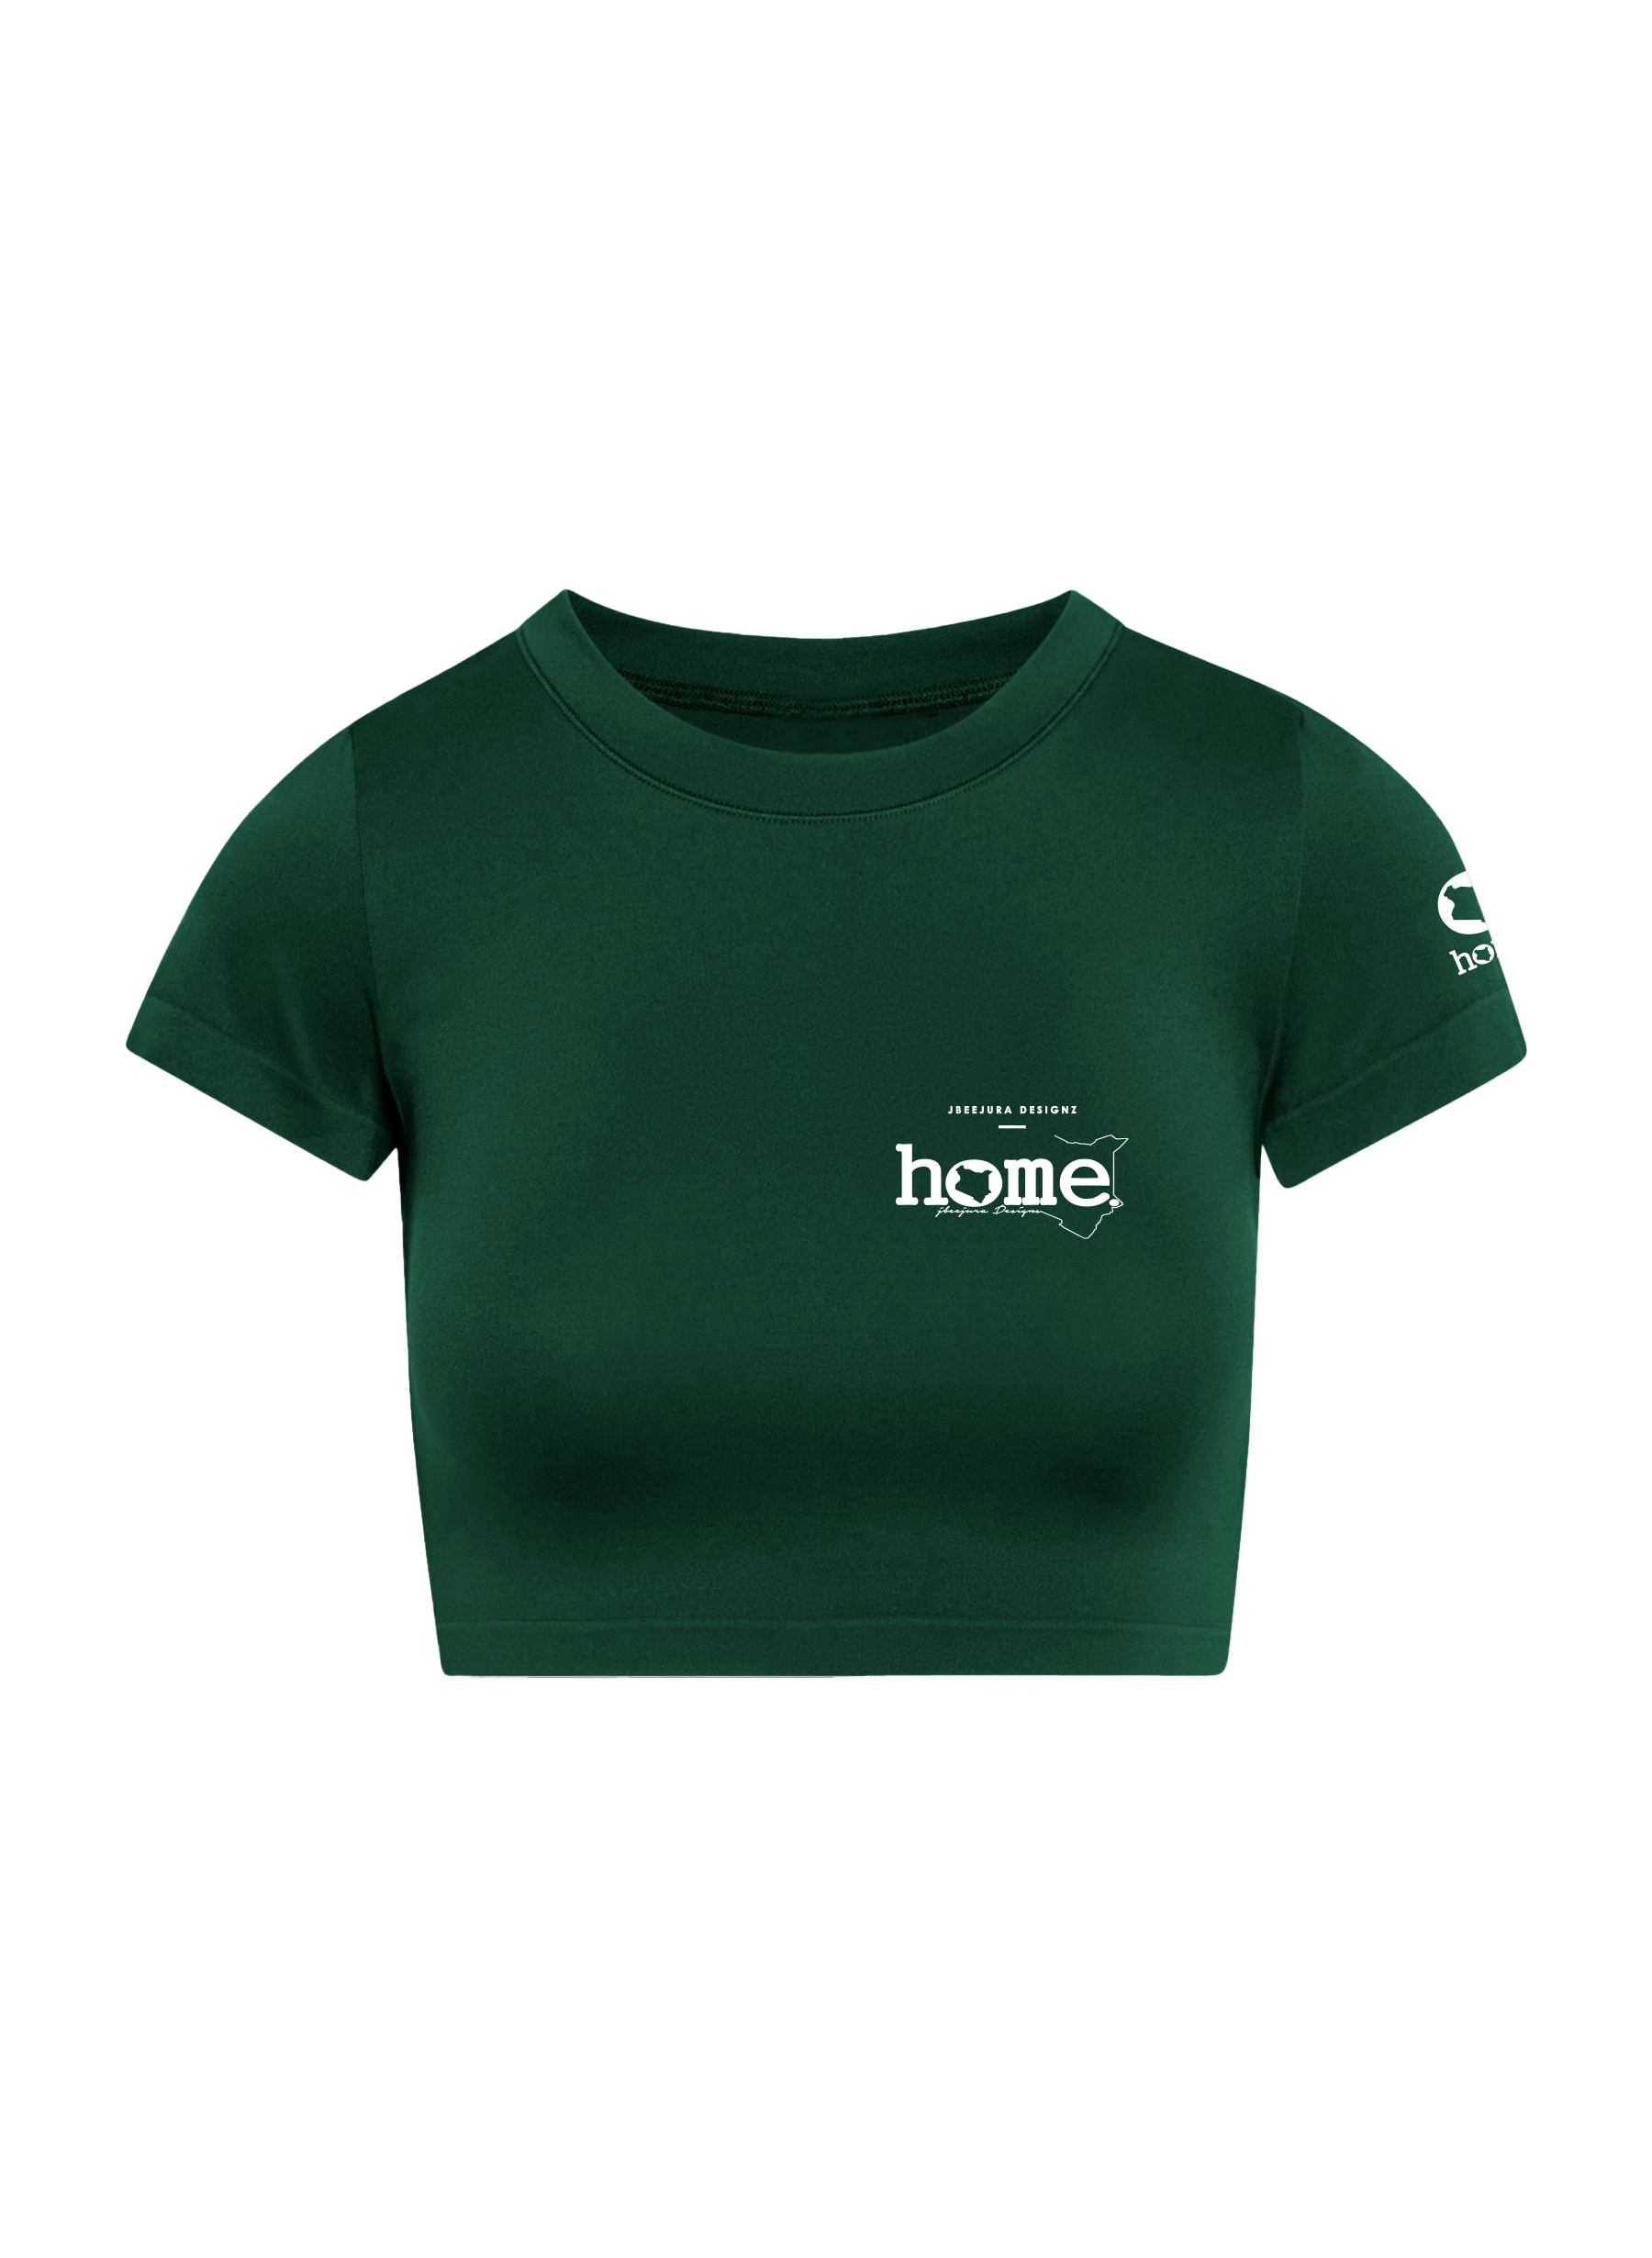 home_254 SHORT SLEEVED RICH GREEN CROPPED ARIA TEE WITH A WHITE 3D WORDS PRINT 